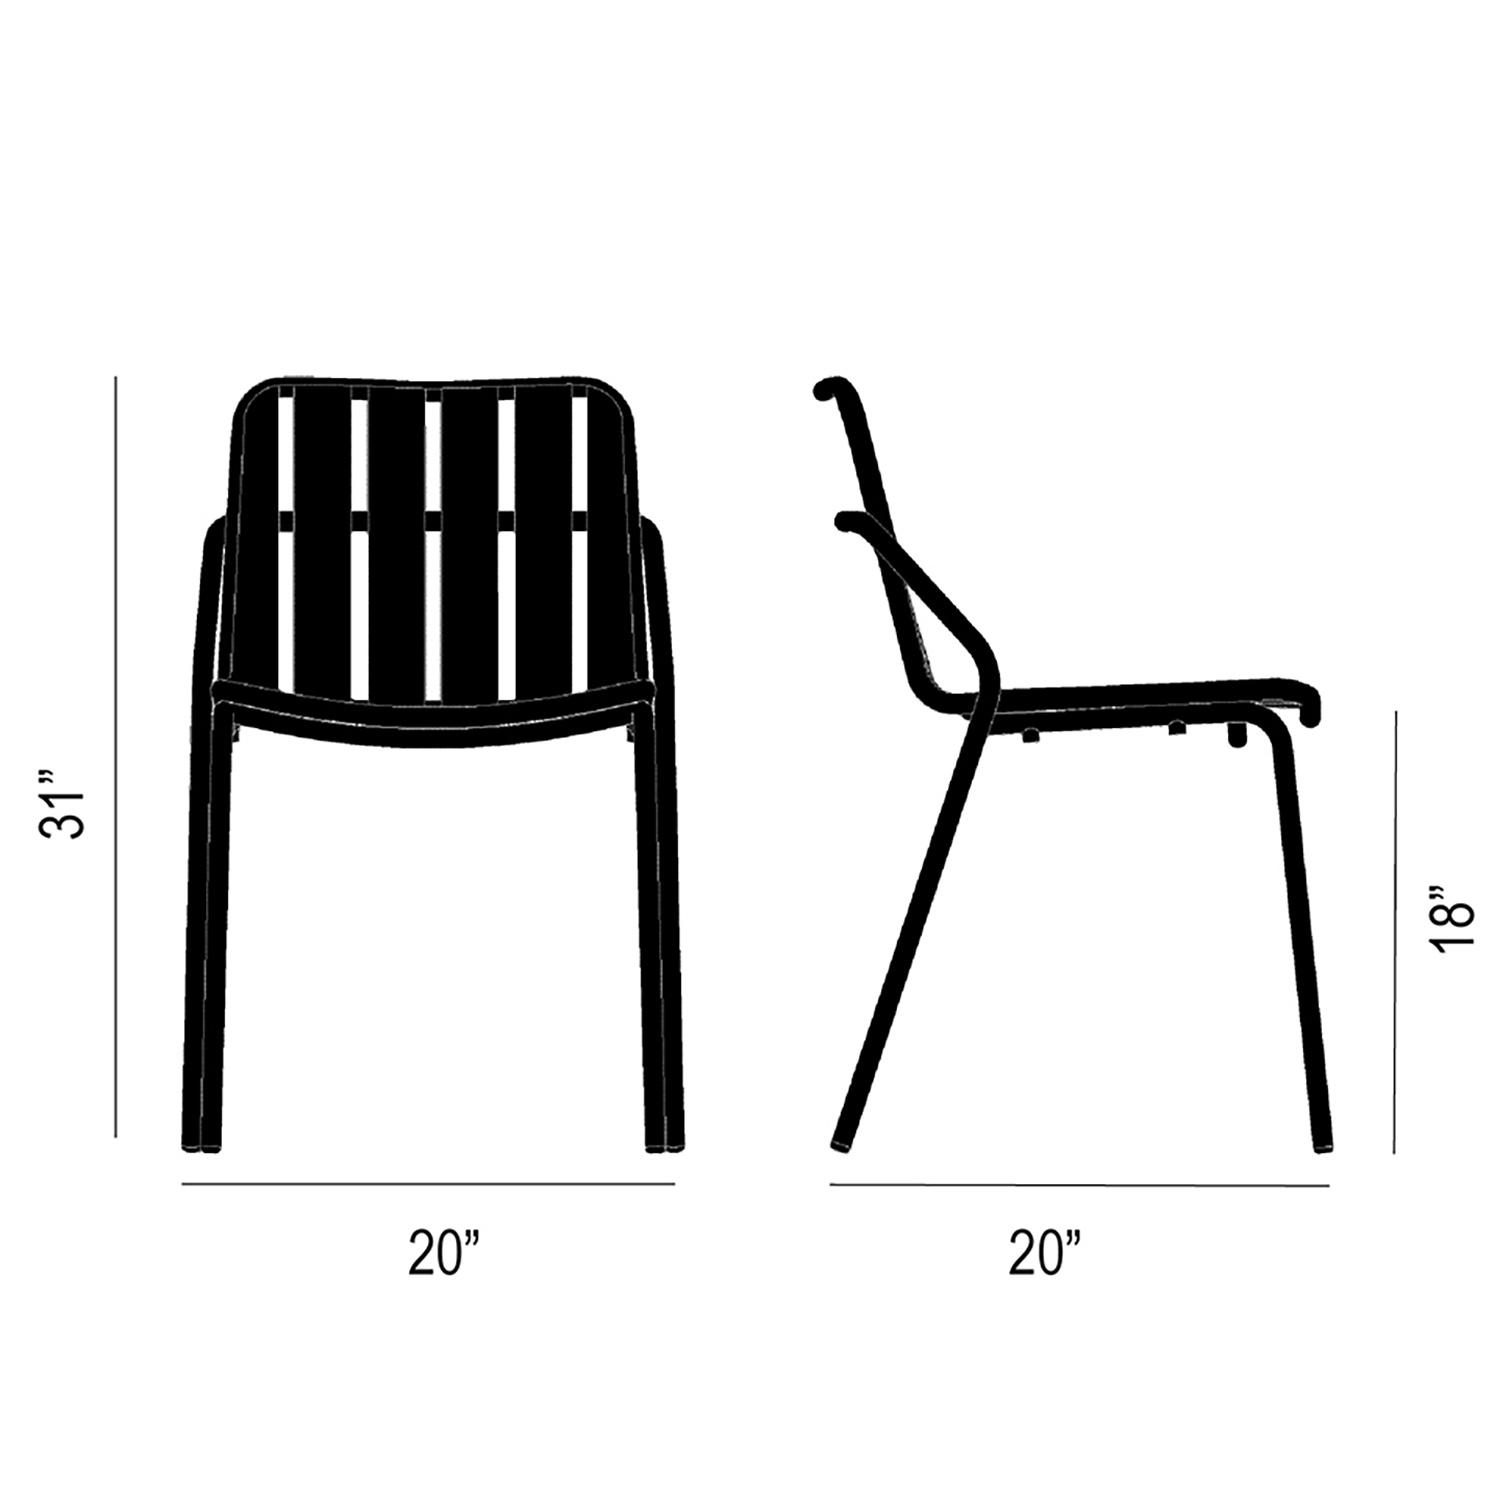 Sling Outdoor Chair Product Silhouette